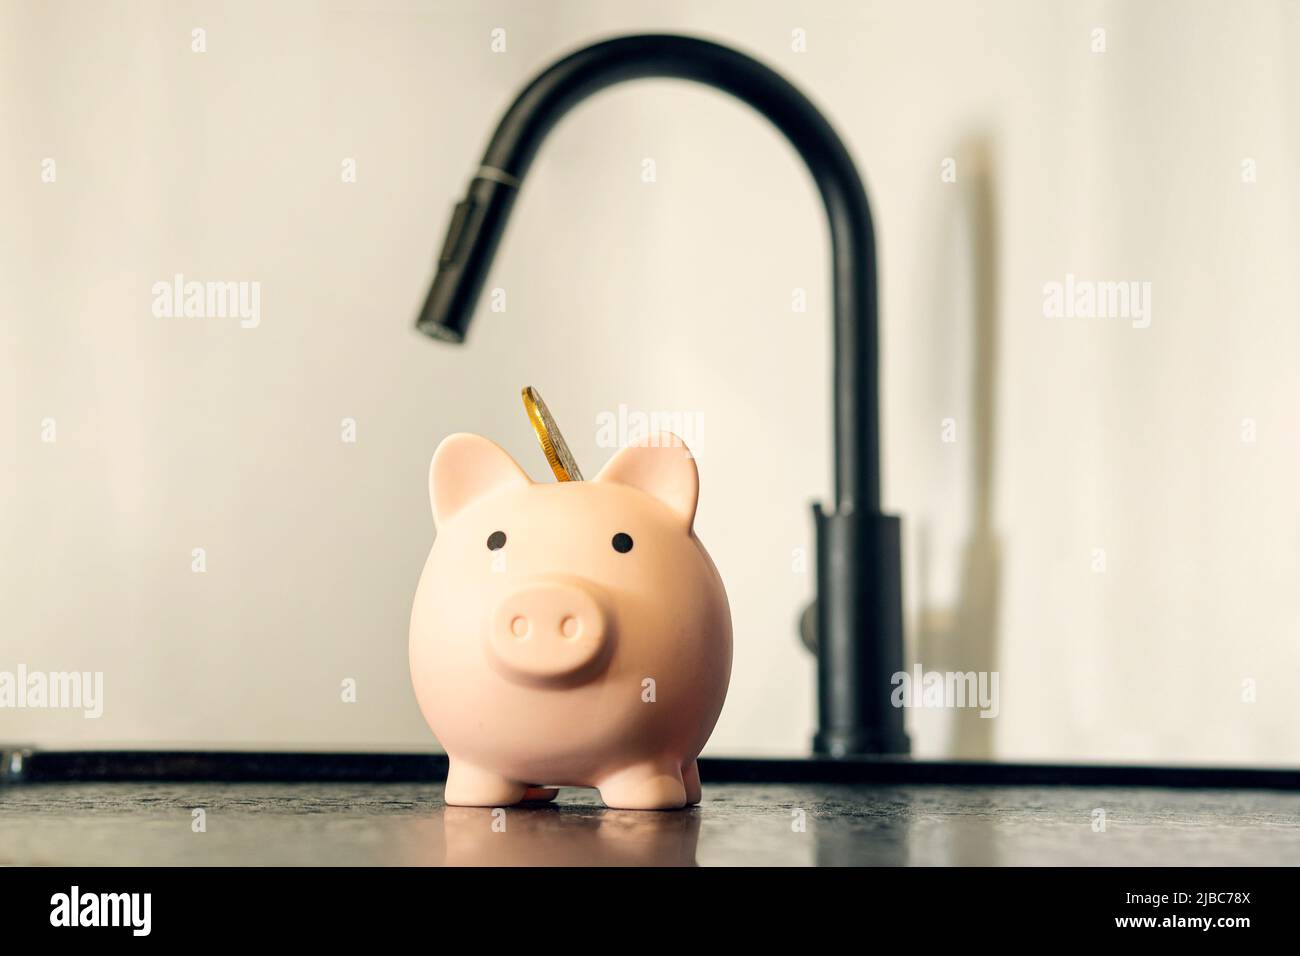 Pink piggy bank and tap on wooden surface. Saving water concept the rise in price of housing and communal services. Stock Photo